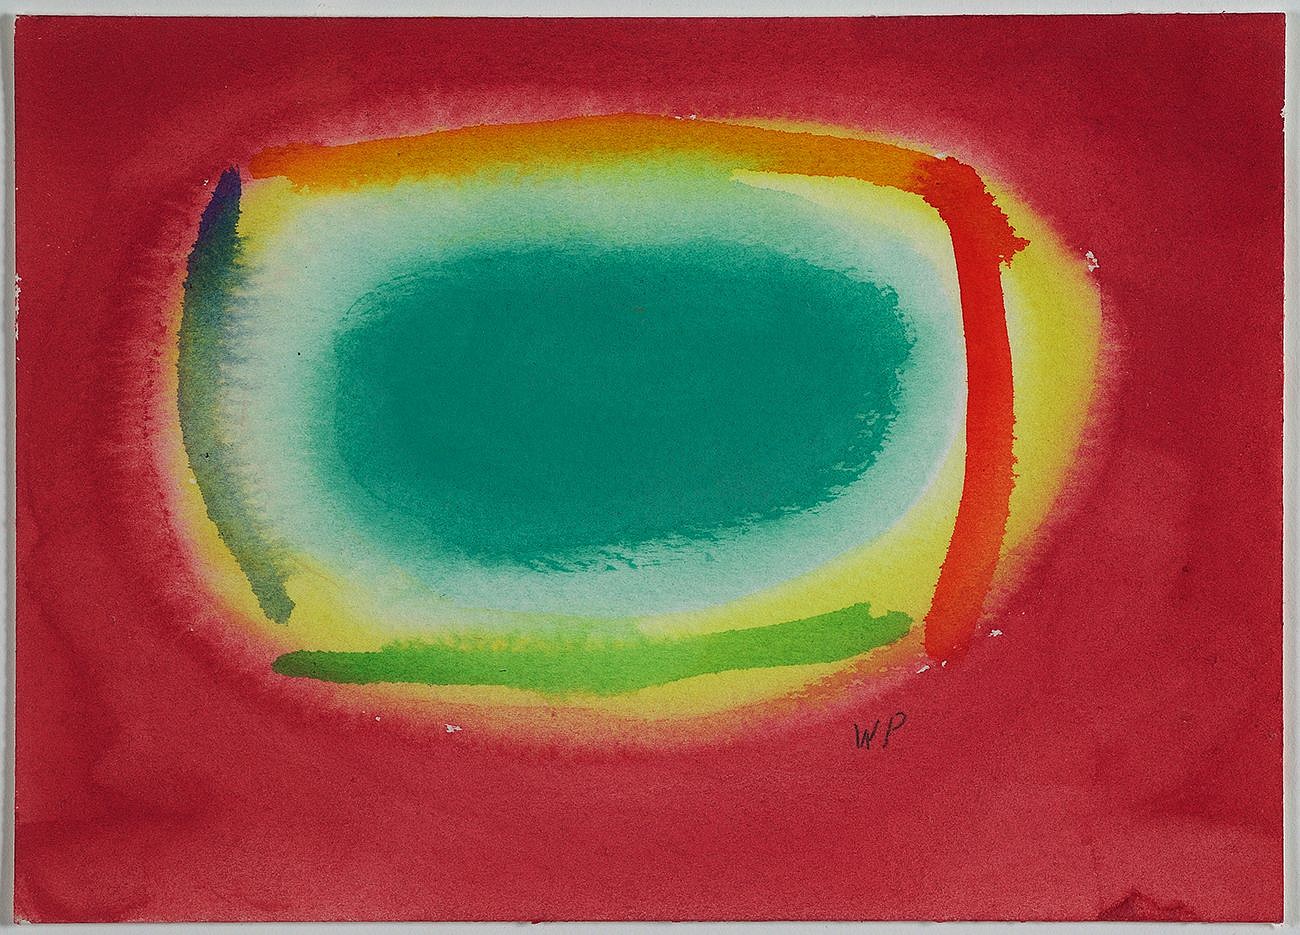 William Perehudoff, AP-80-053 | SOLD, 1980
Acrylic on paper, 5 x 7 in.
SOLD
PER-00040